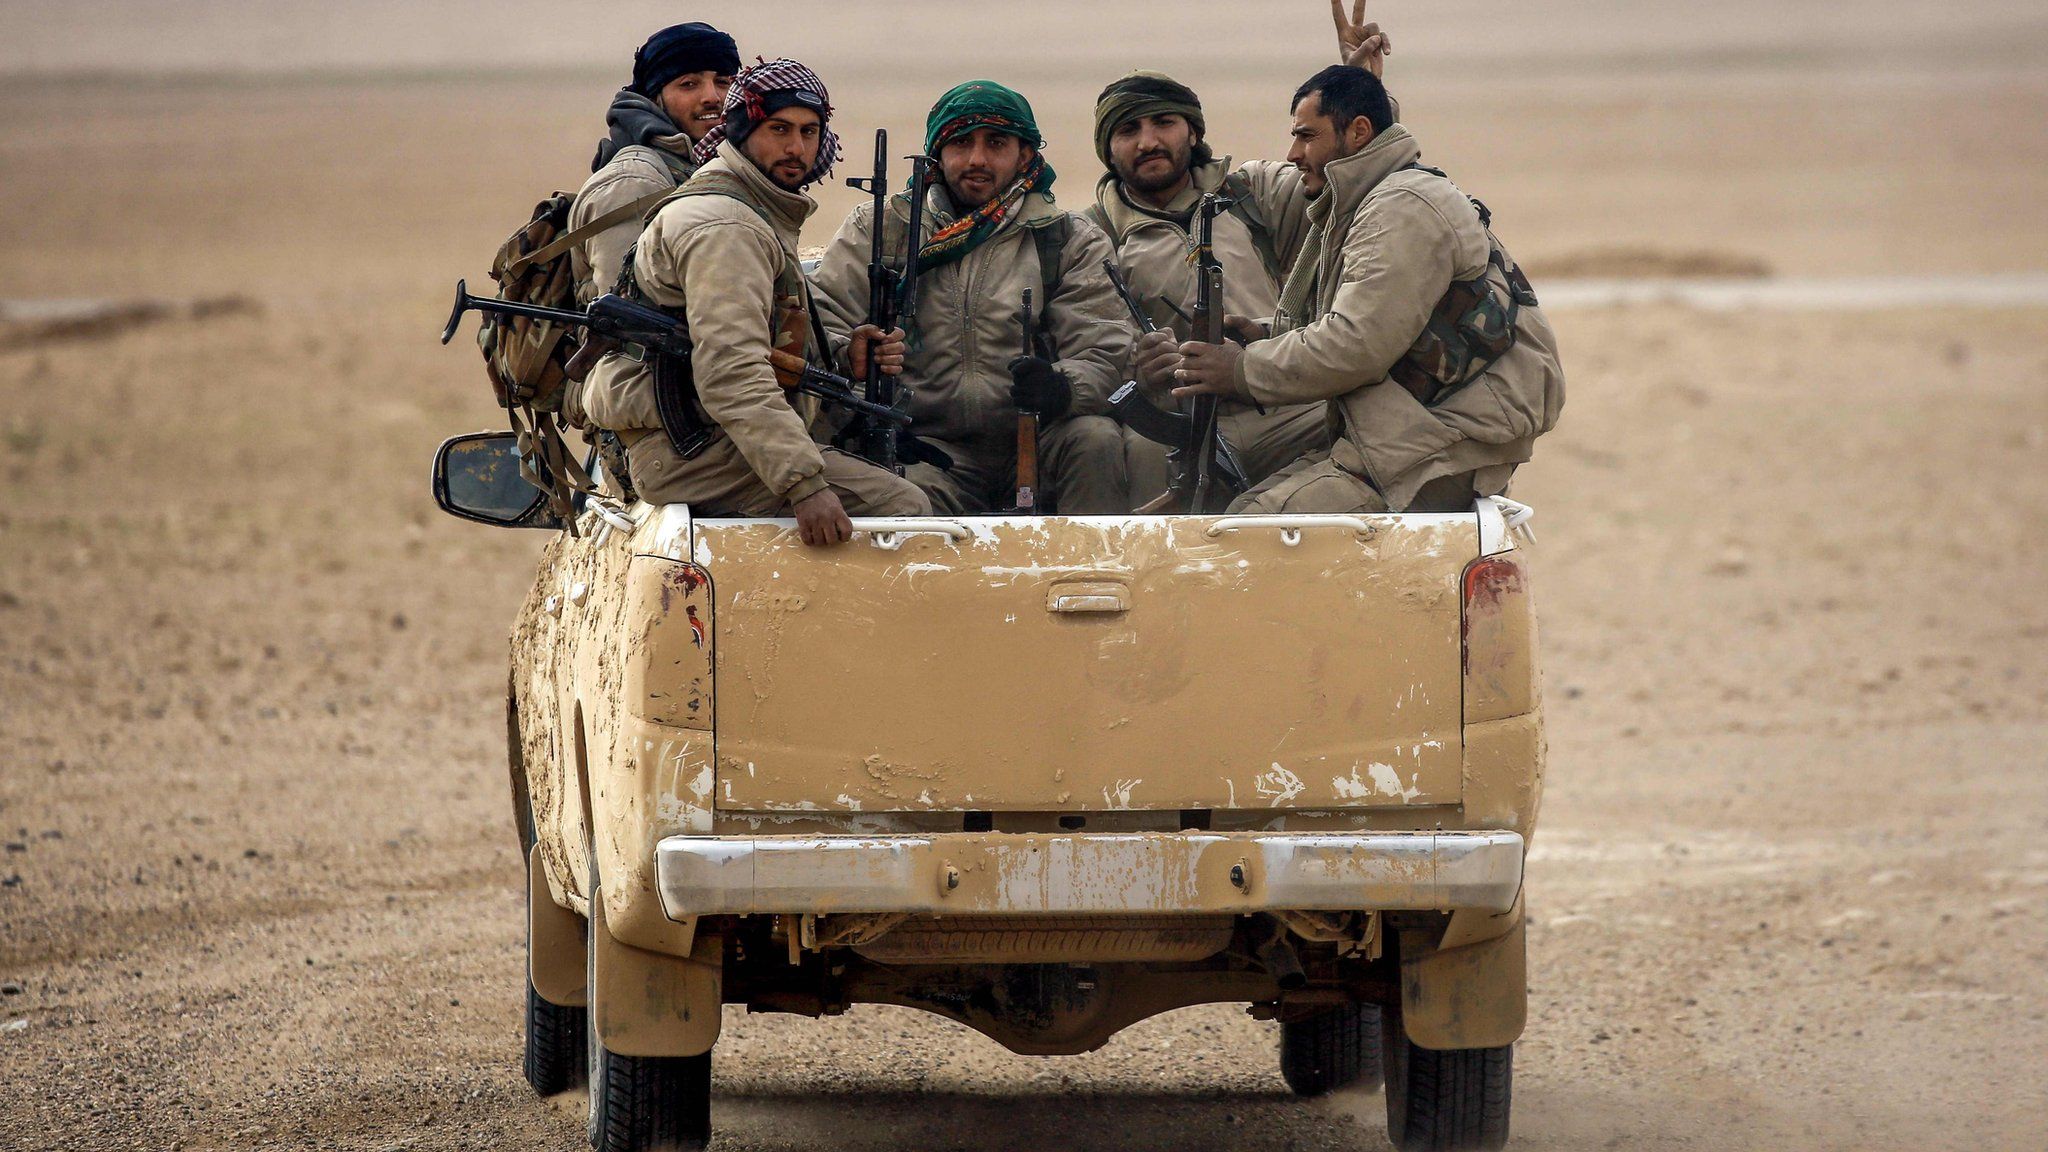 File photo shows members of the Syrian Democratic Forces (SDF) in vehicle north of Raqqa (8 February 2017)